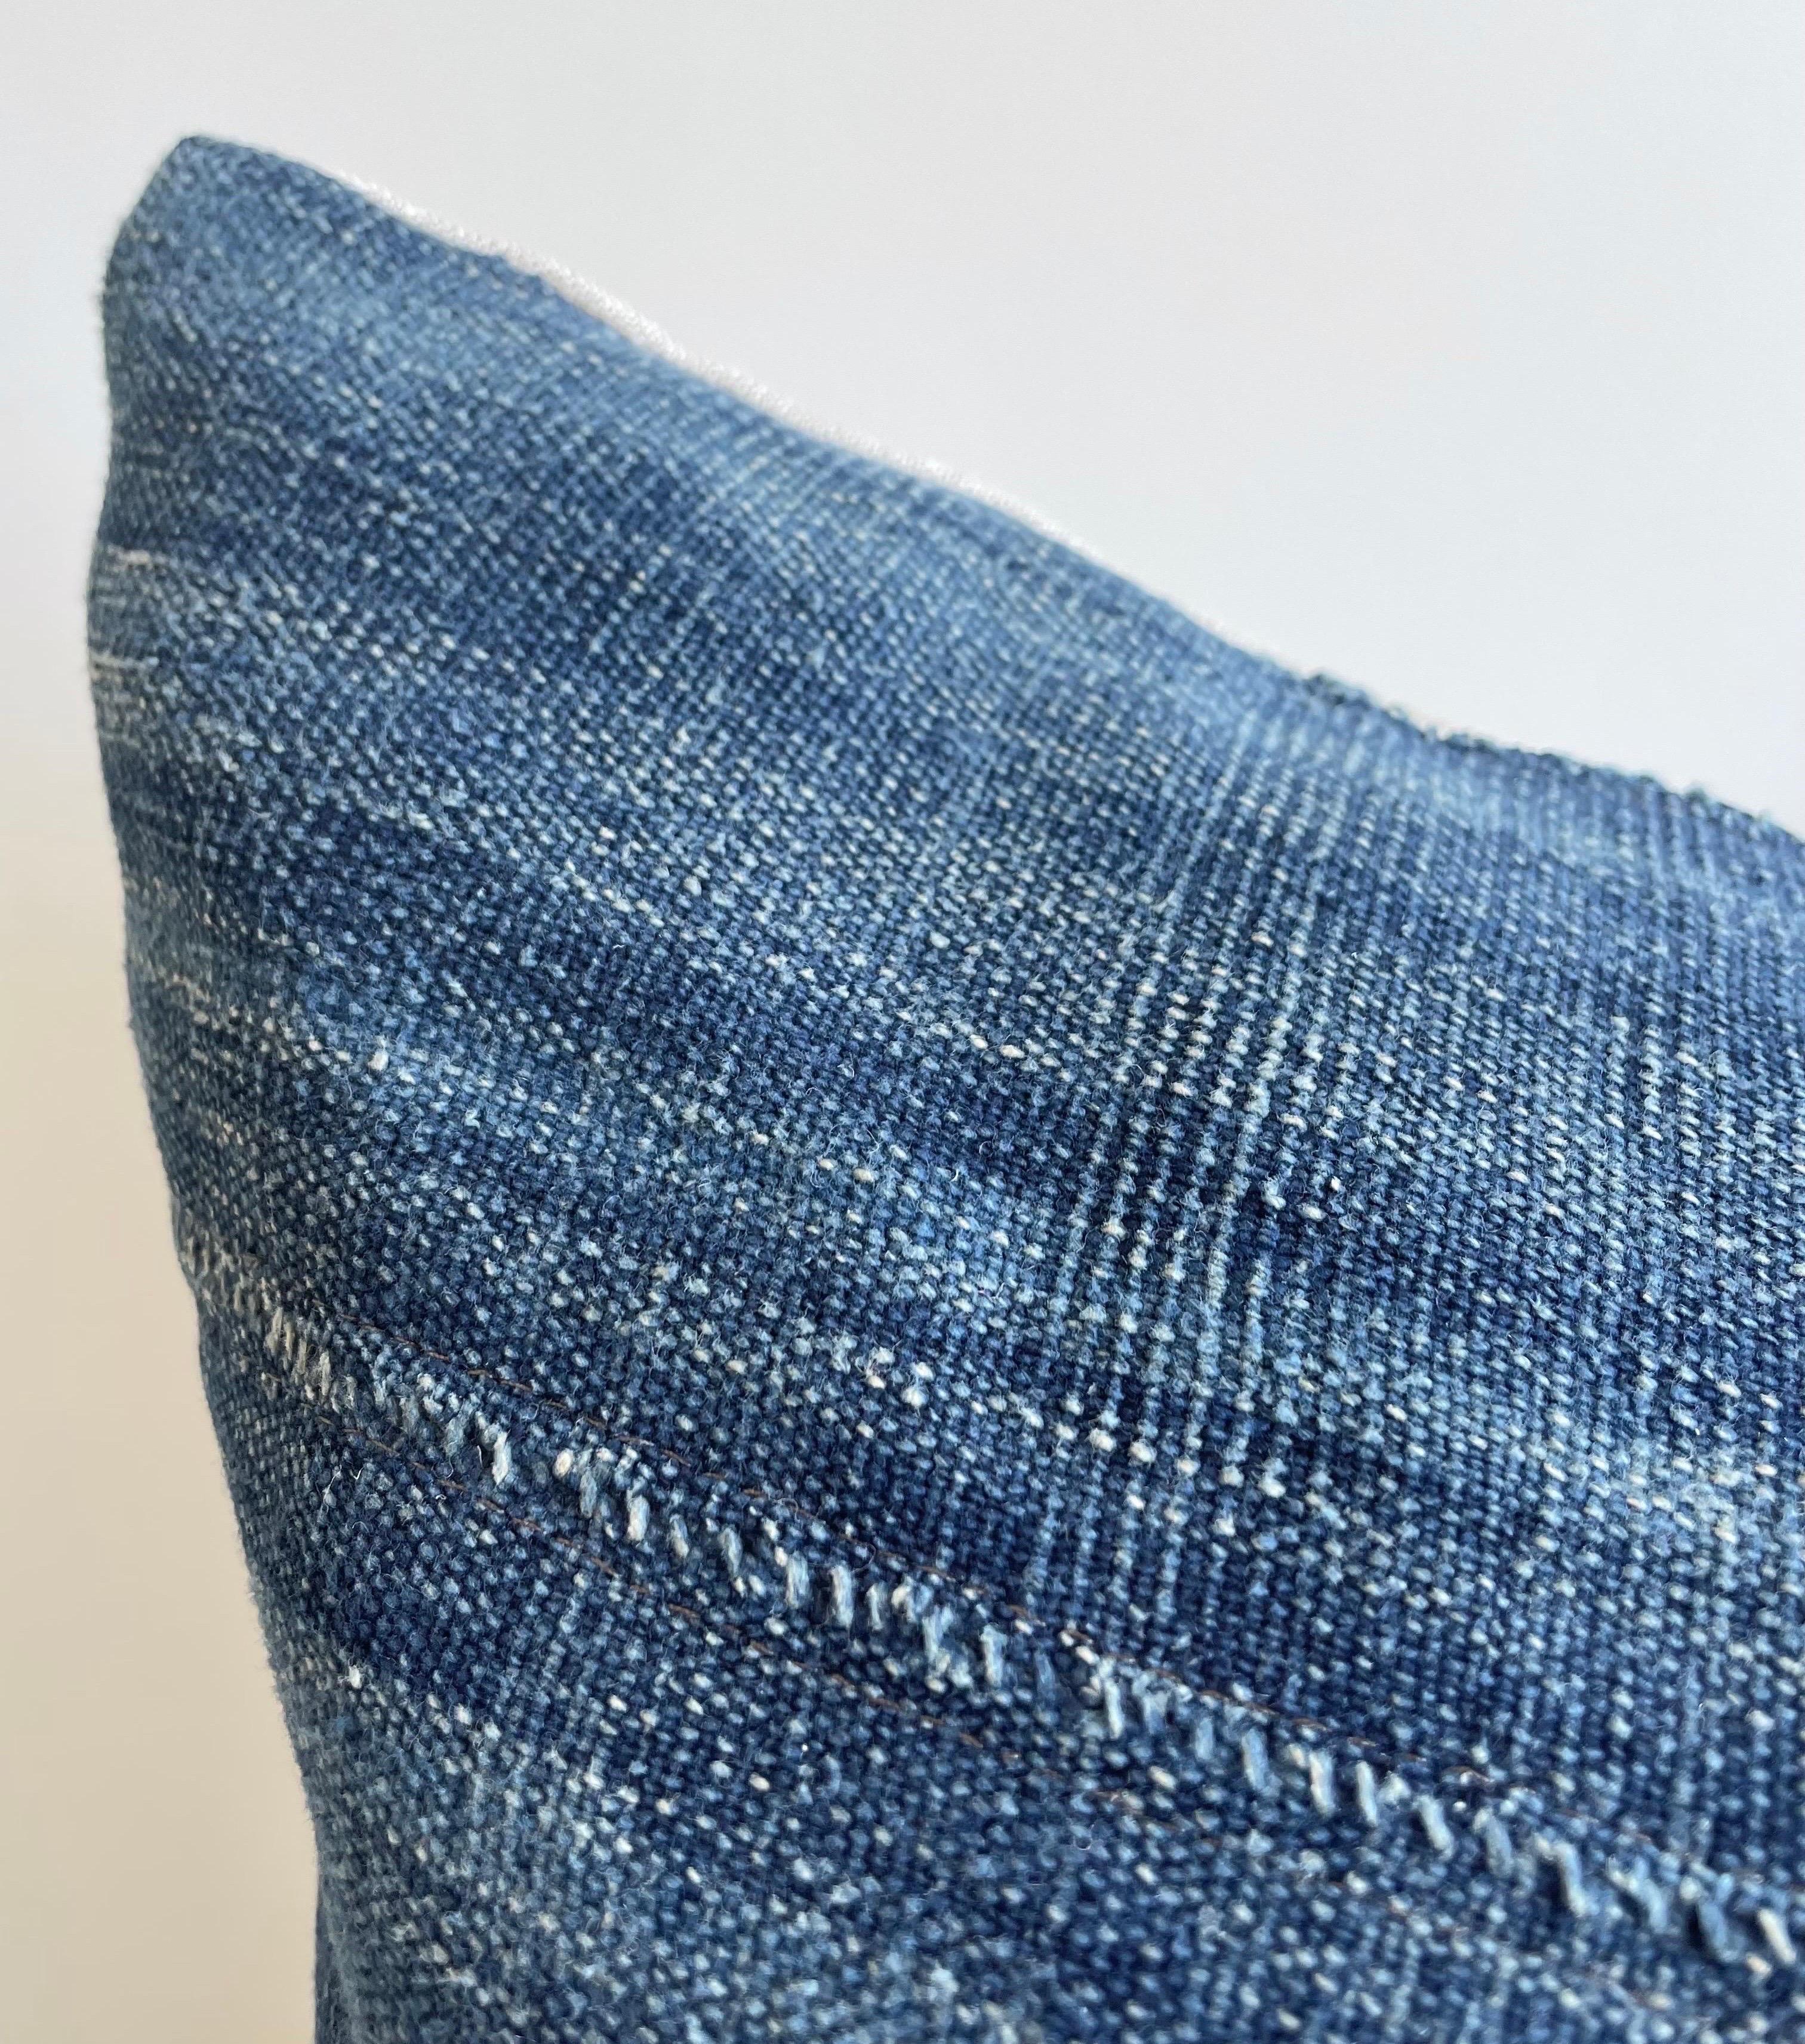 Antique faded blue indigo stripe African mudcloth pillows with original fringe details. Fabric: Vintage hemp / cotton fabric front, natural colored linen fabric back. Due to the nature of vintage textiles, there may be fading or markings. While they